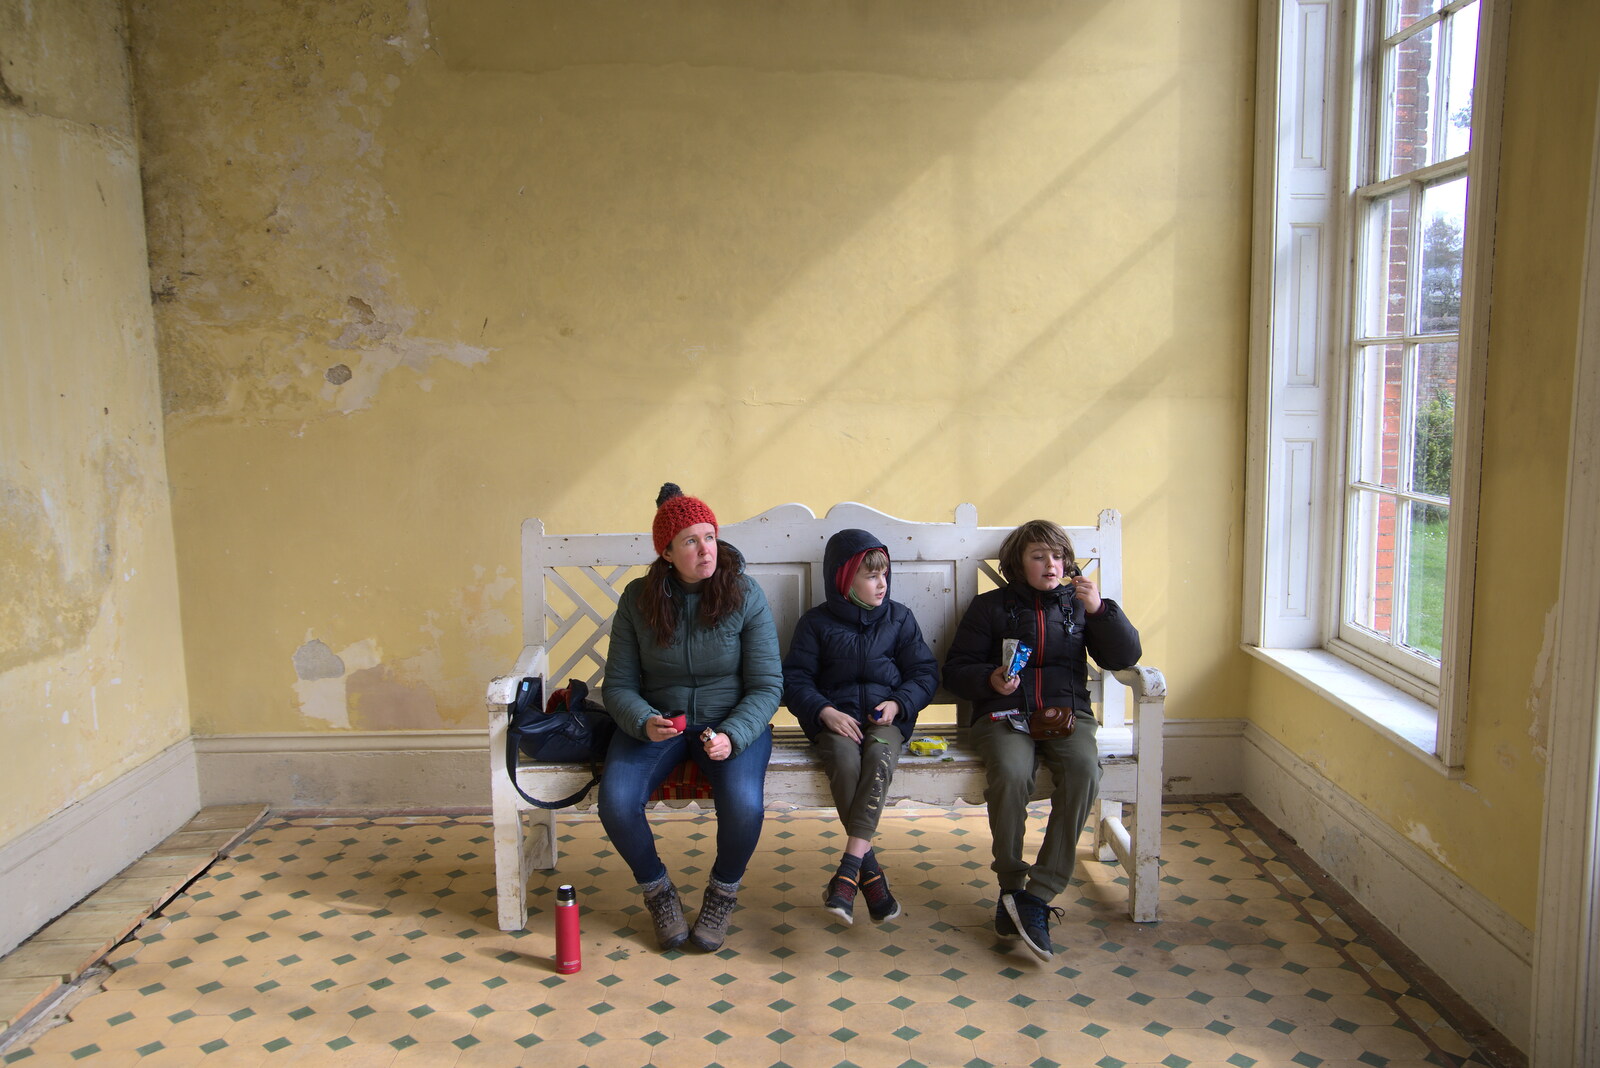 The gang eat a snack in the summer house from A Return to Ickworth House, Horringer, Suffolk - 11th April 2021